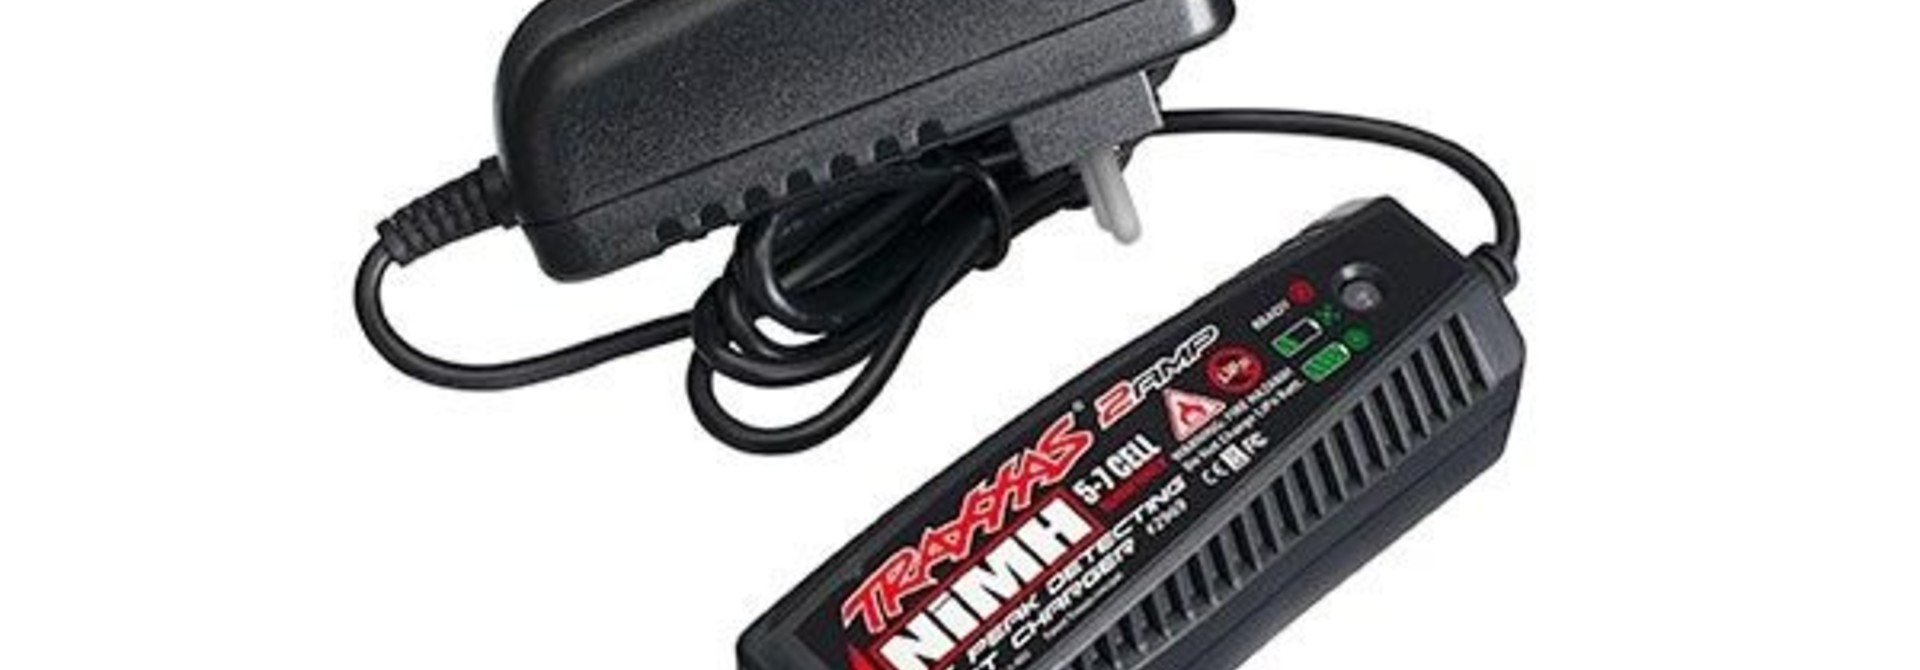 Charger, AC, 2 amp NiMH peak detecting (5-7 cell, 6.0-8.4, TRX2969G